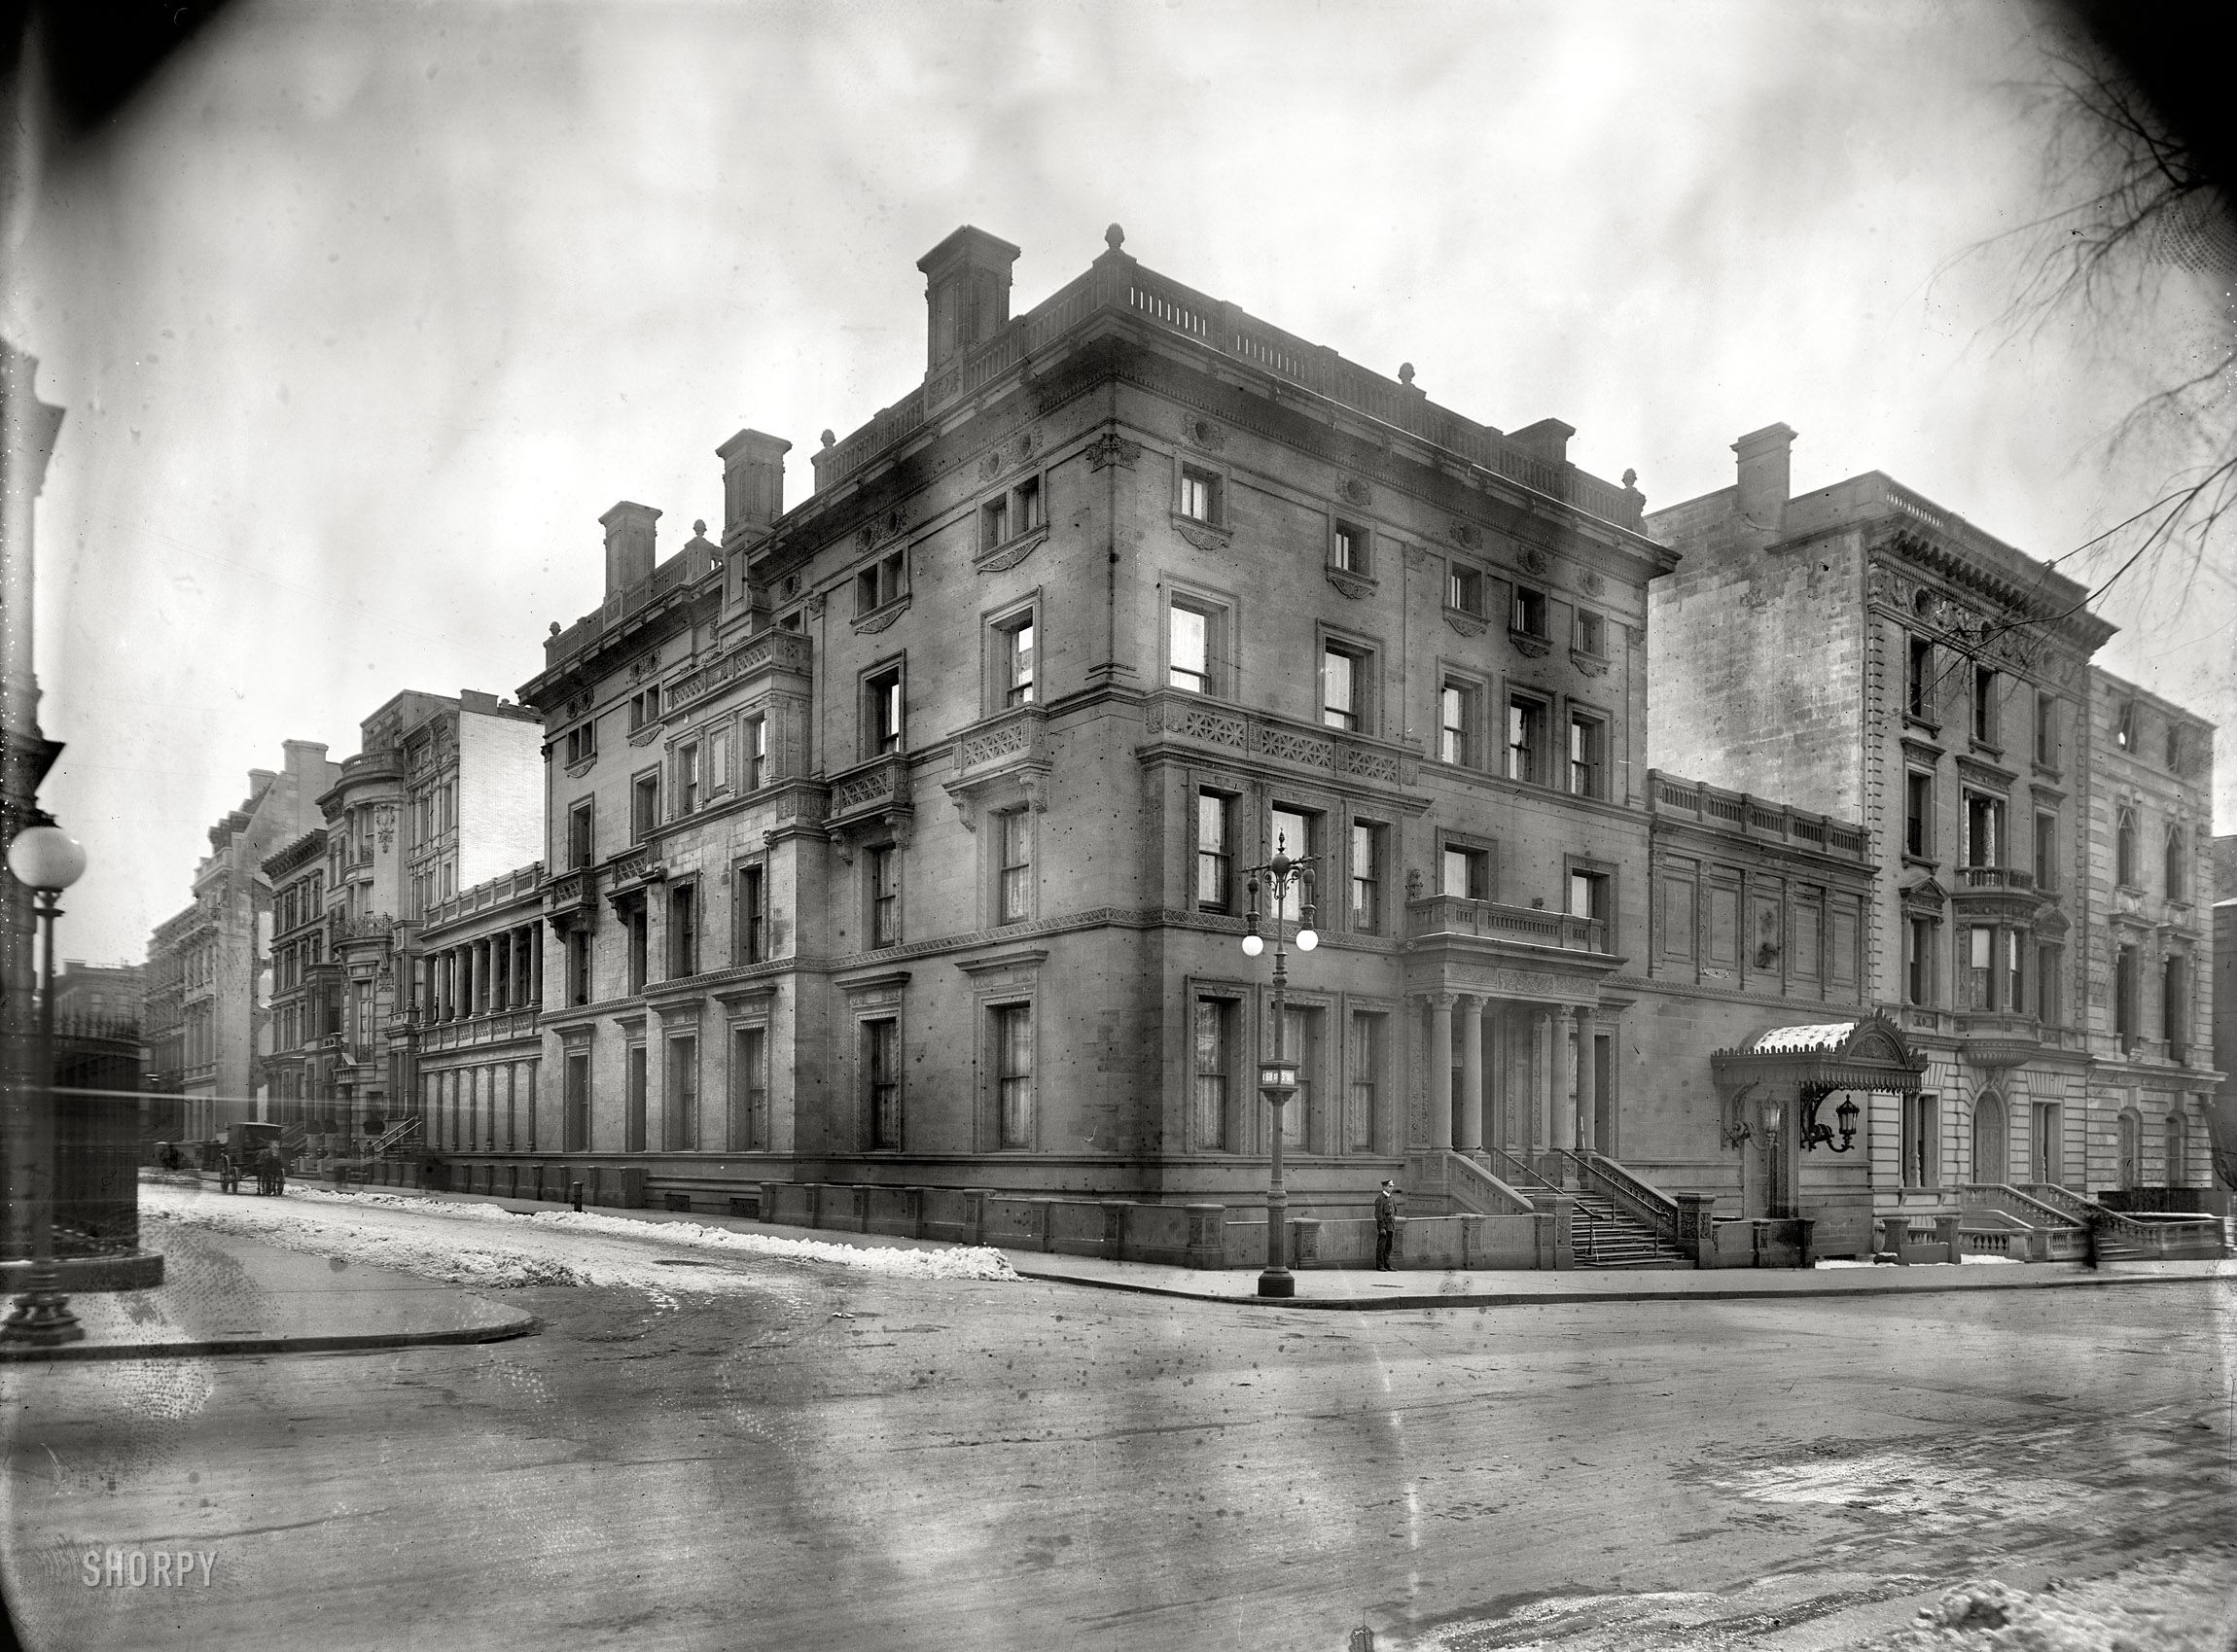 New York circa 1908. "Charles T. Yerkes house, Fifth Avenue and East 68th." 8x10 glass negative, George Grantham Bain Collection. View full size.